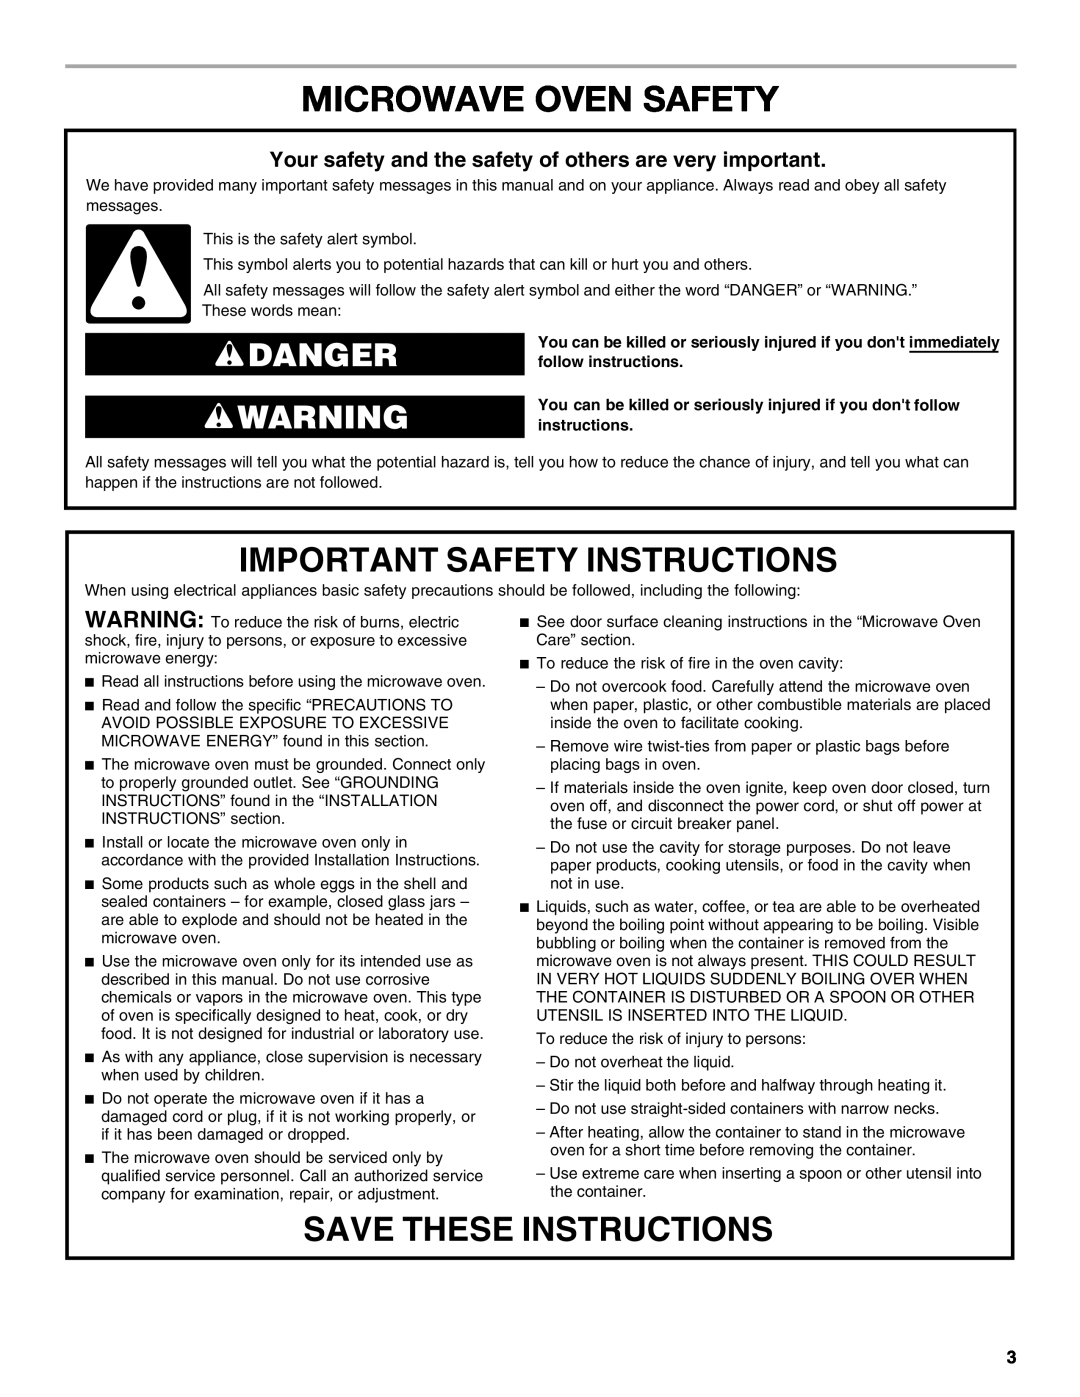 Whirlpool WMC10007 manual Microwave Oven Safety, Important Safety Instructions, Save These Instructions, Danger 